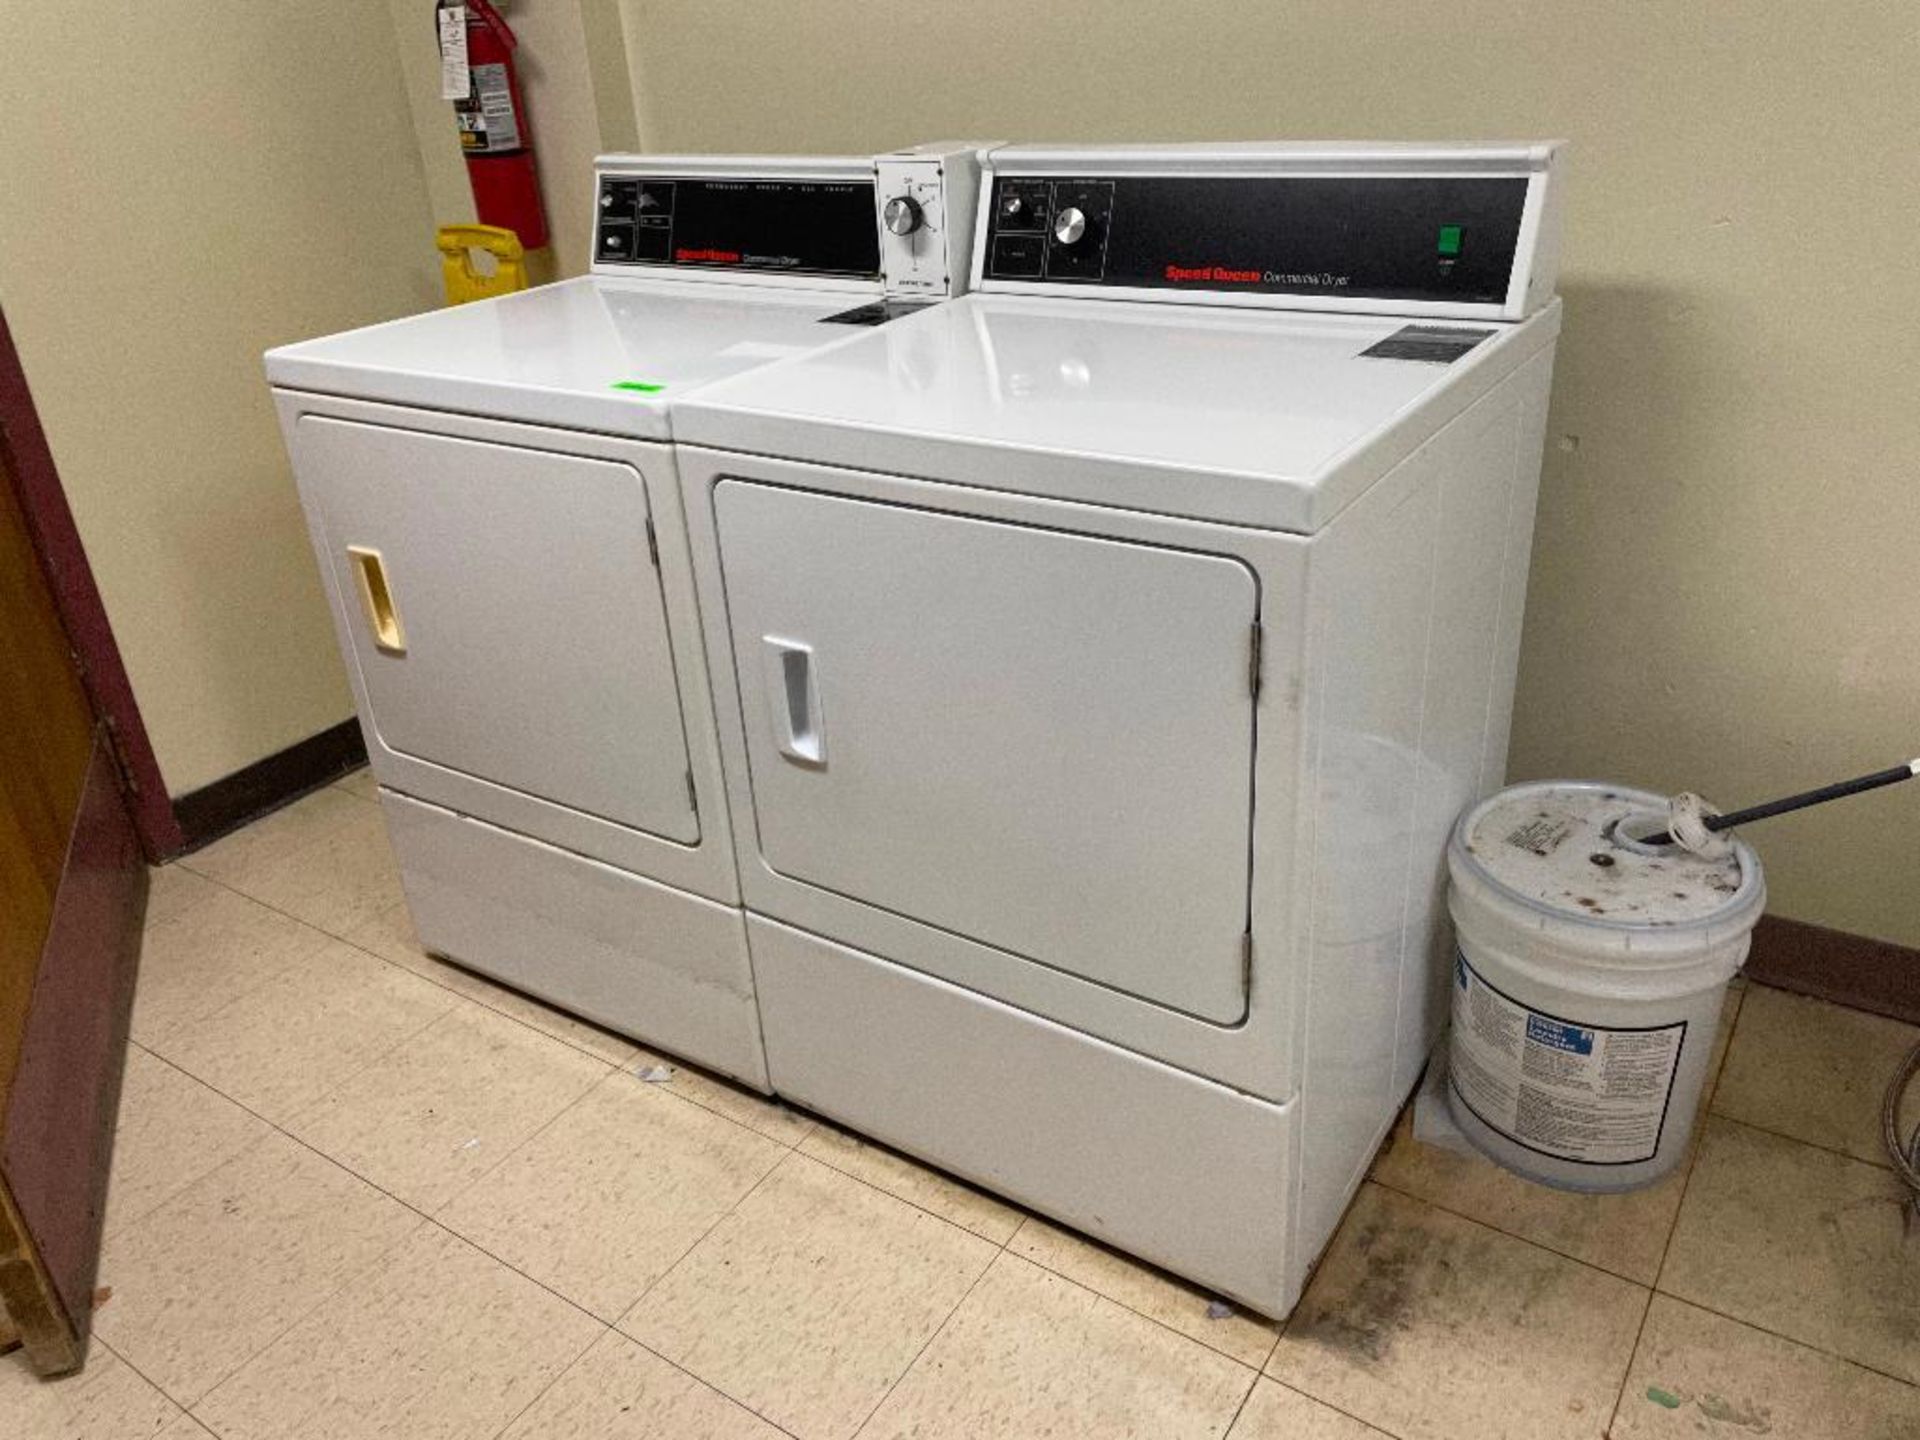 DESCRIPTION: WASHER AND DRYER SET ADDITIONAL INFORMATION: (1) - WASHER AND (1) - DRYER INCLUDED. SEE - Image 3 of 5